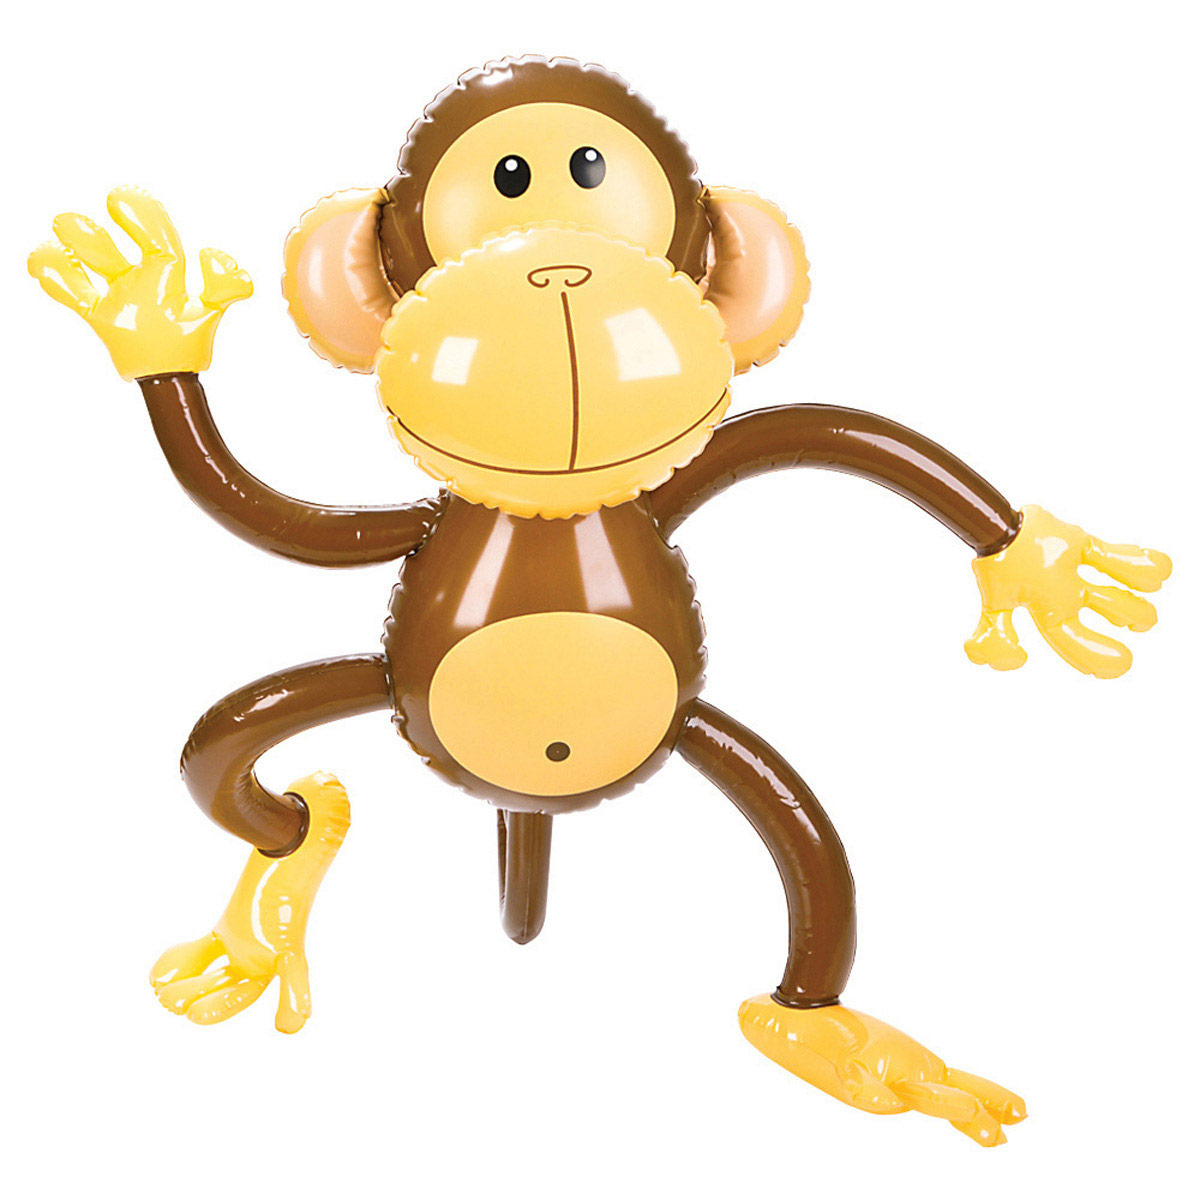 Monkey Baby Shower Theme Ideas - My Practical Baby Shower Guide